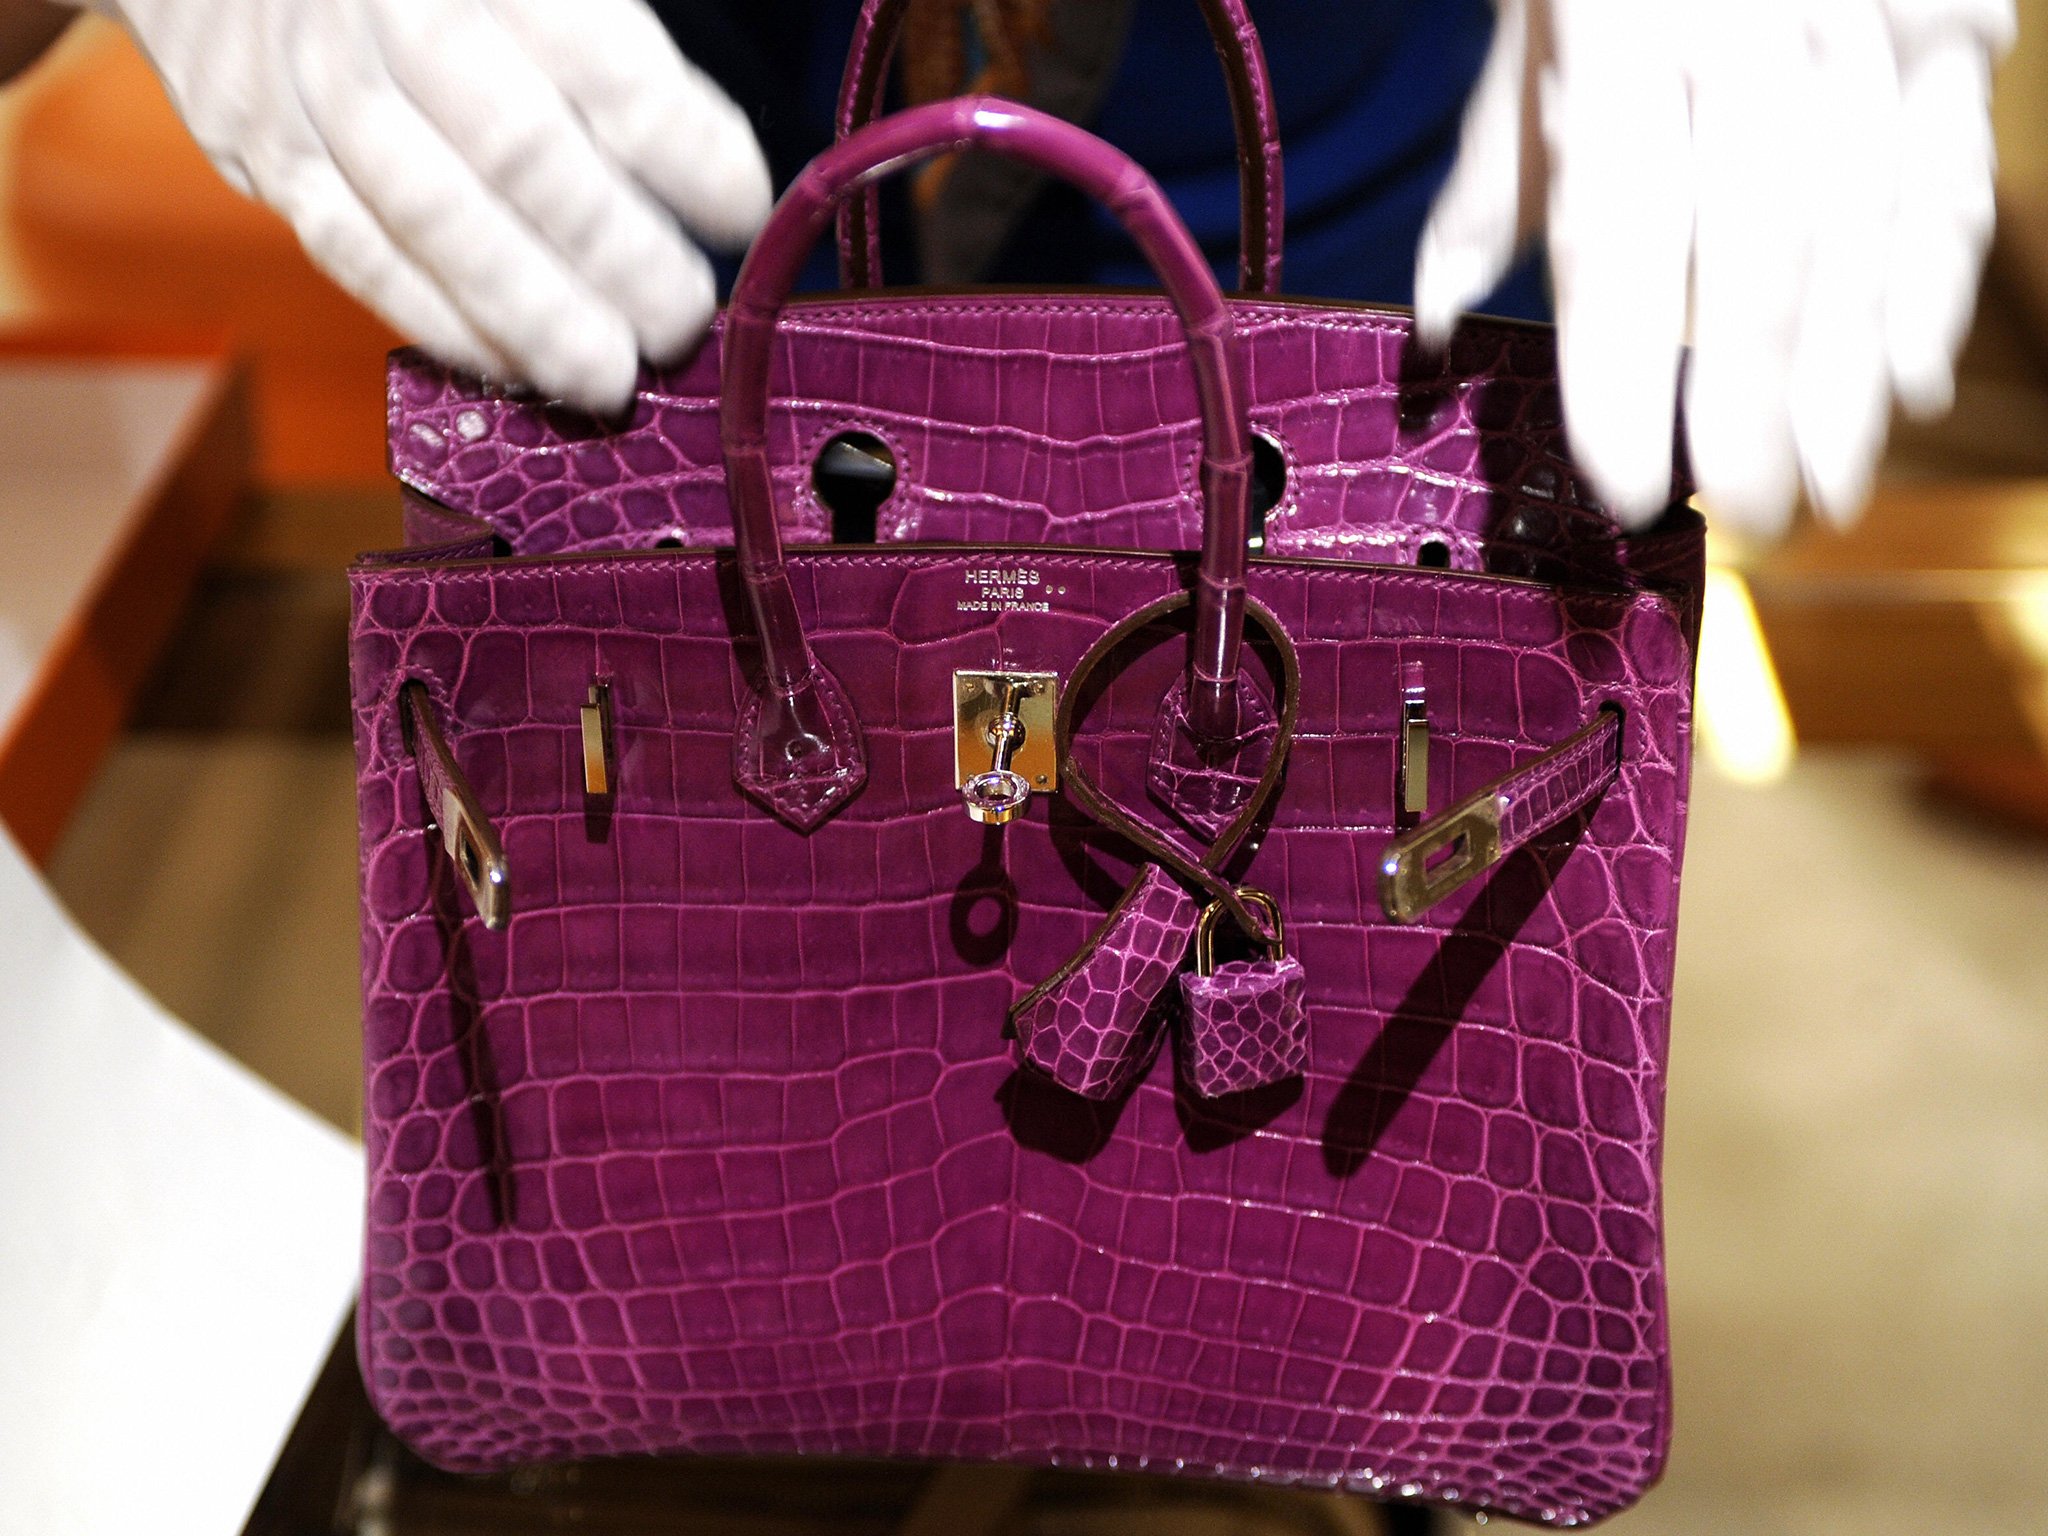 Crocodile-skin Hermes handbag sells for a record $222,912 at Christie's  auction